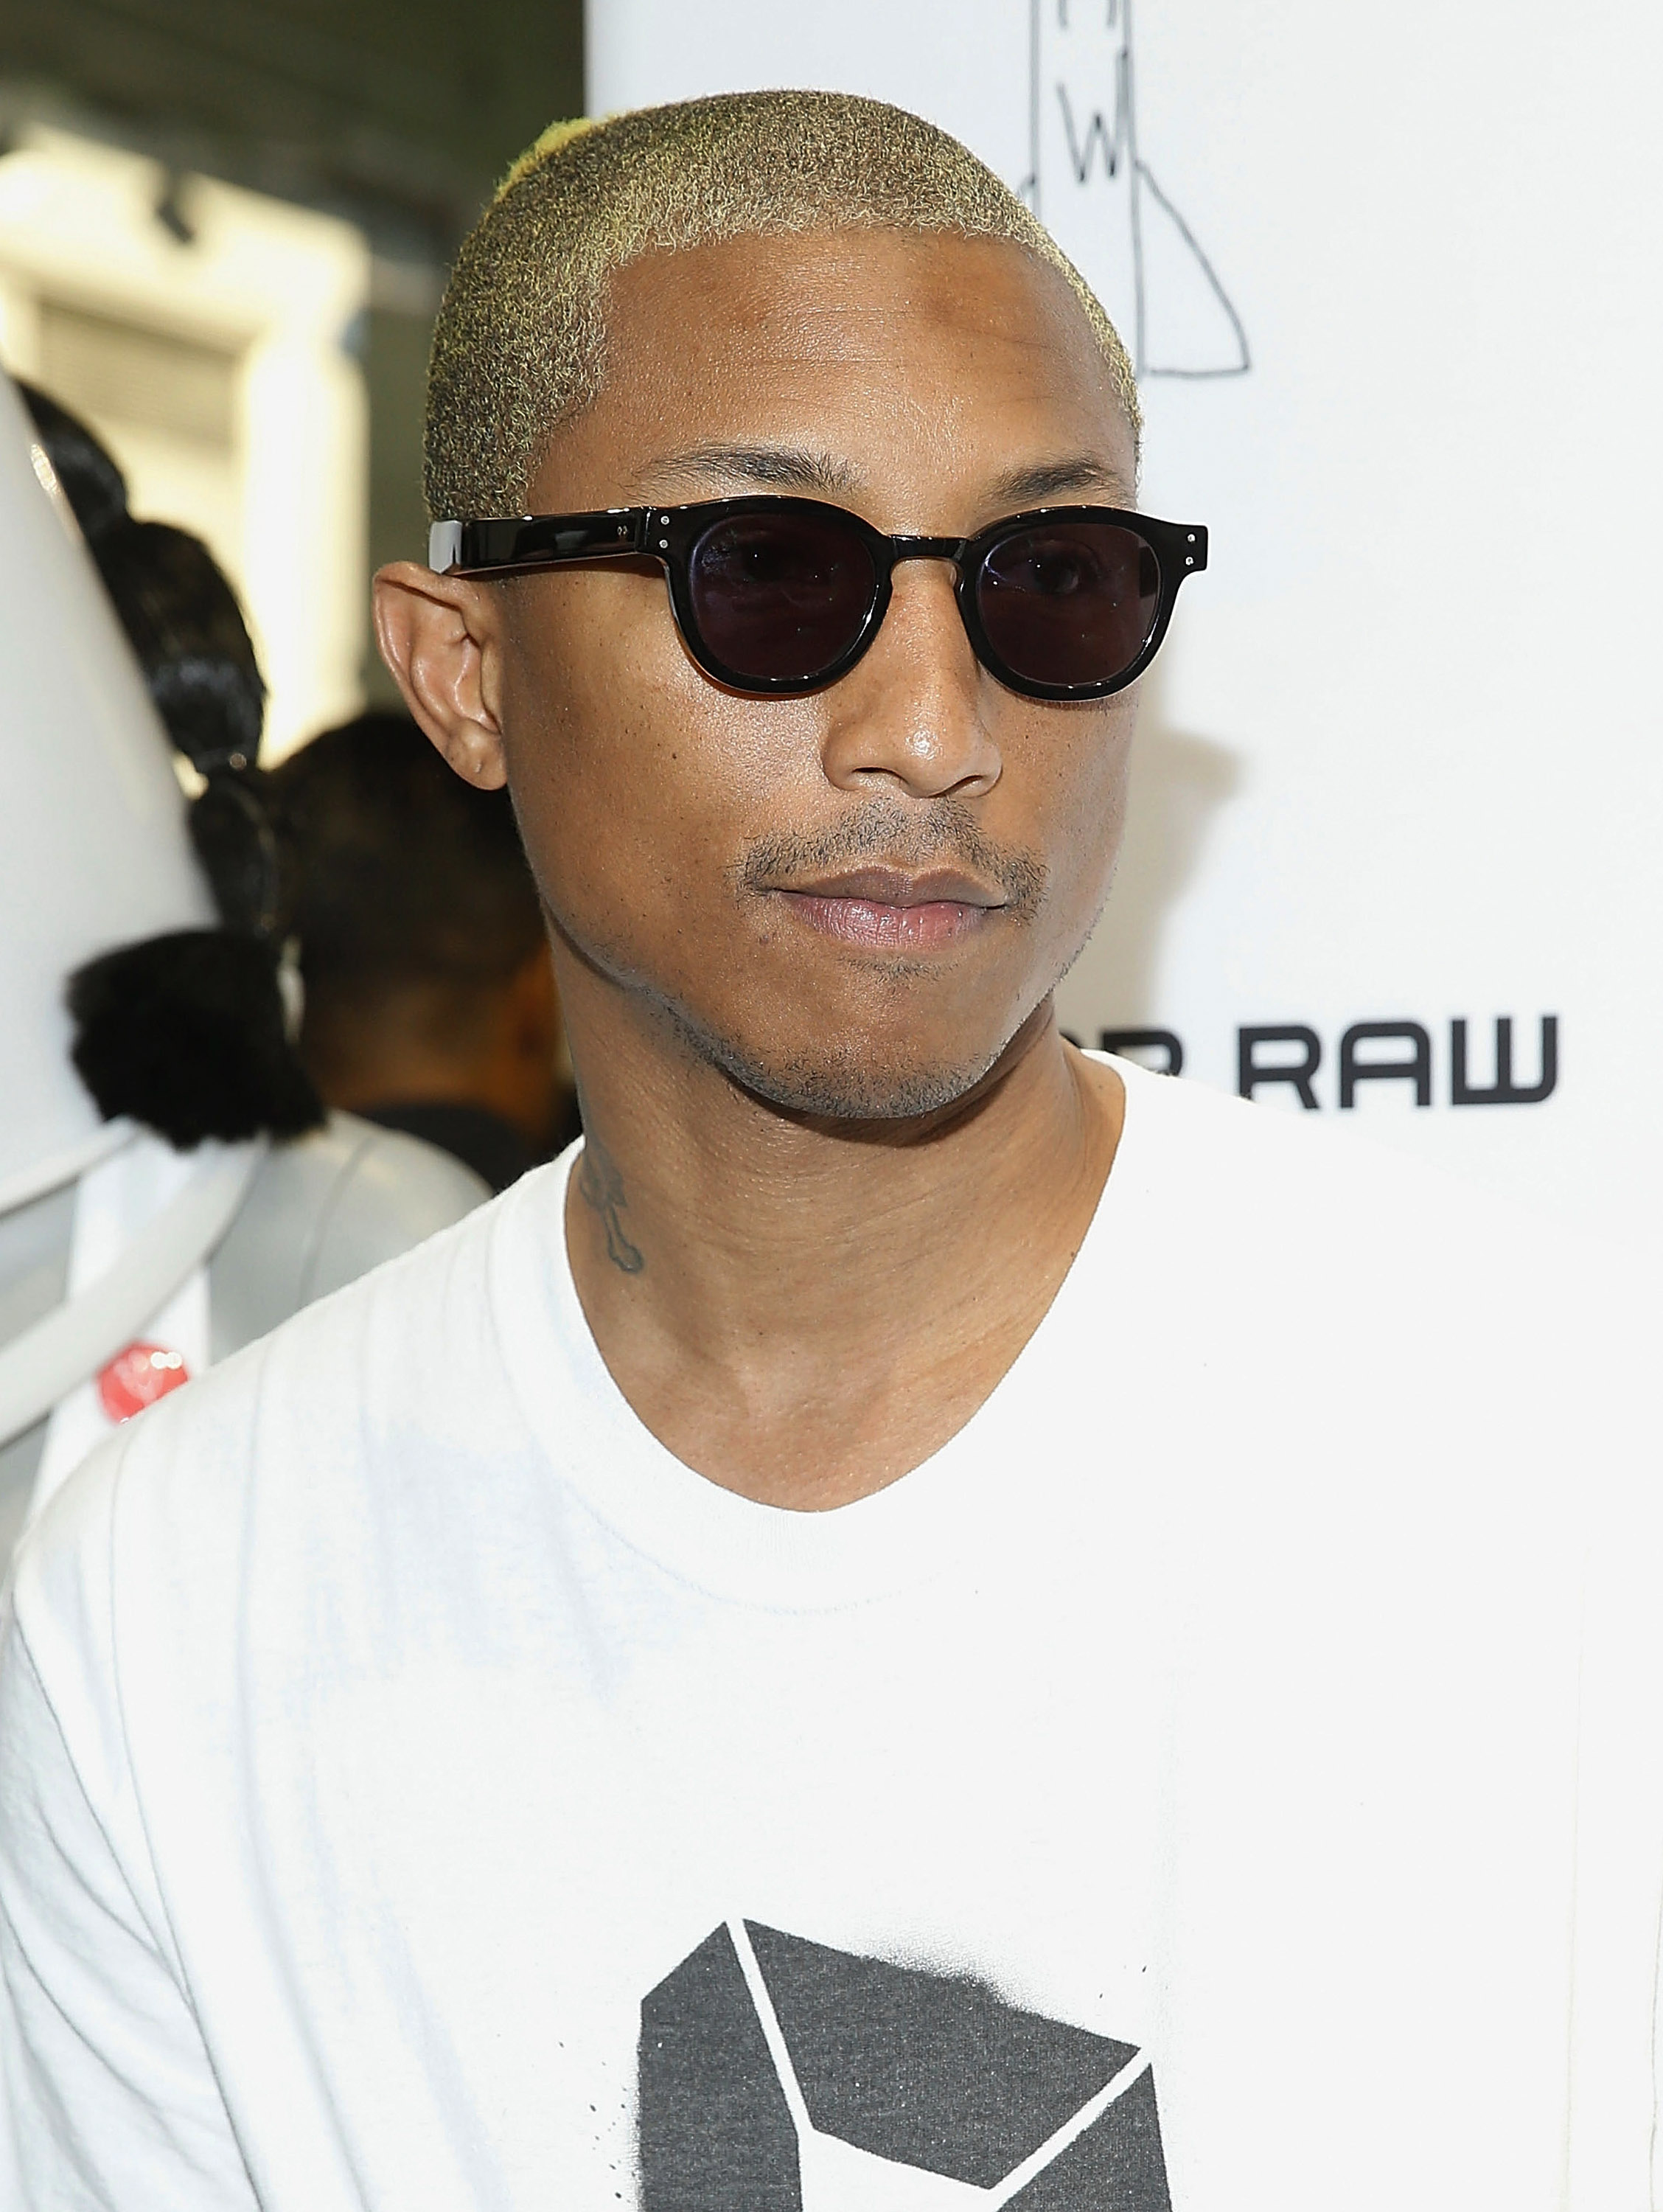 NEW YORK, NY - JUNE 01:  Singer Pharrell Williams attends G-Star RAW Fifth Avenue Store Opening at G-Star RAW Fifth Avenue on June 1, 2016 in New York City.  (Photo by John Lamparski/WireImage)